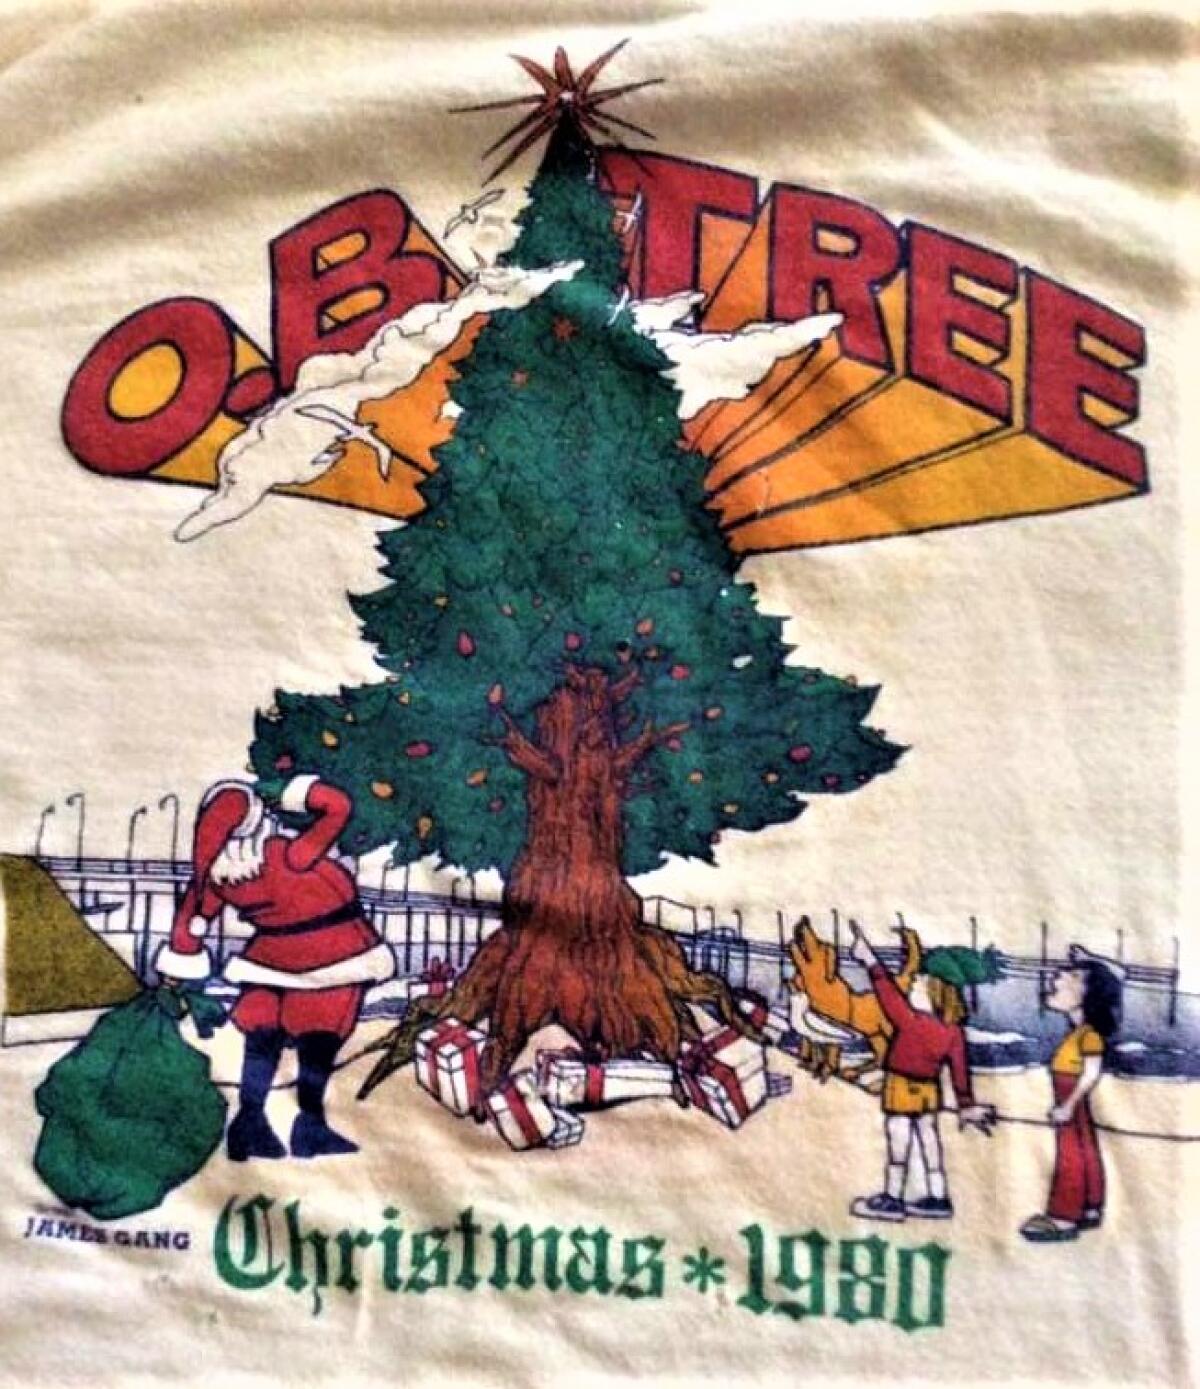 The OB tree T-shirt for Christmas 1980, designed by Dale Sedenquist.